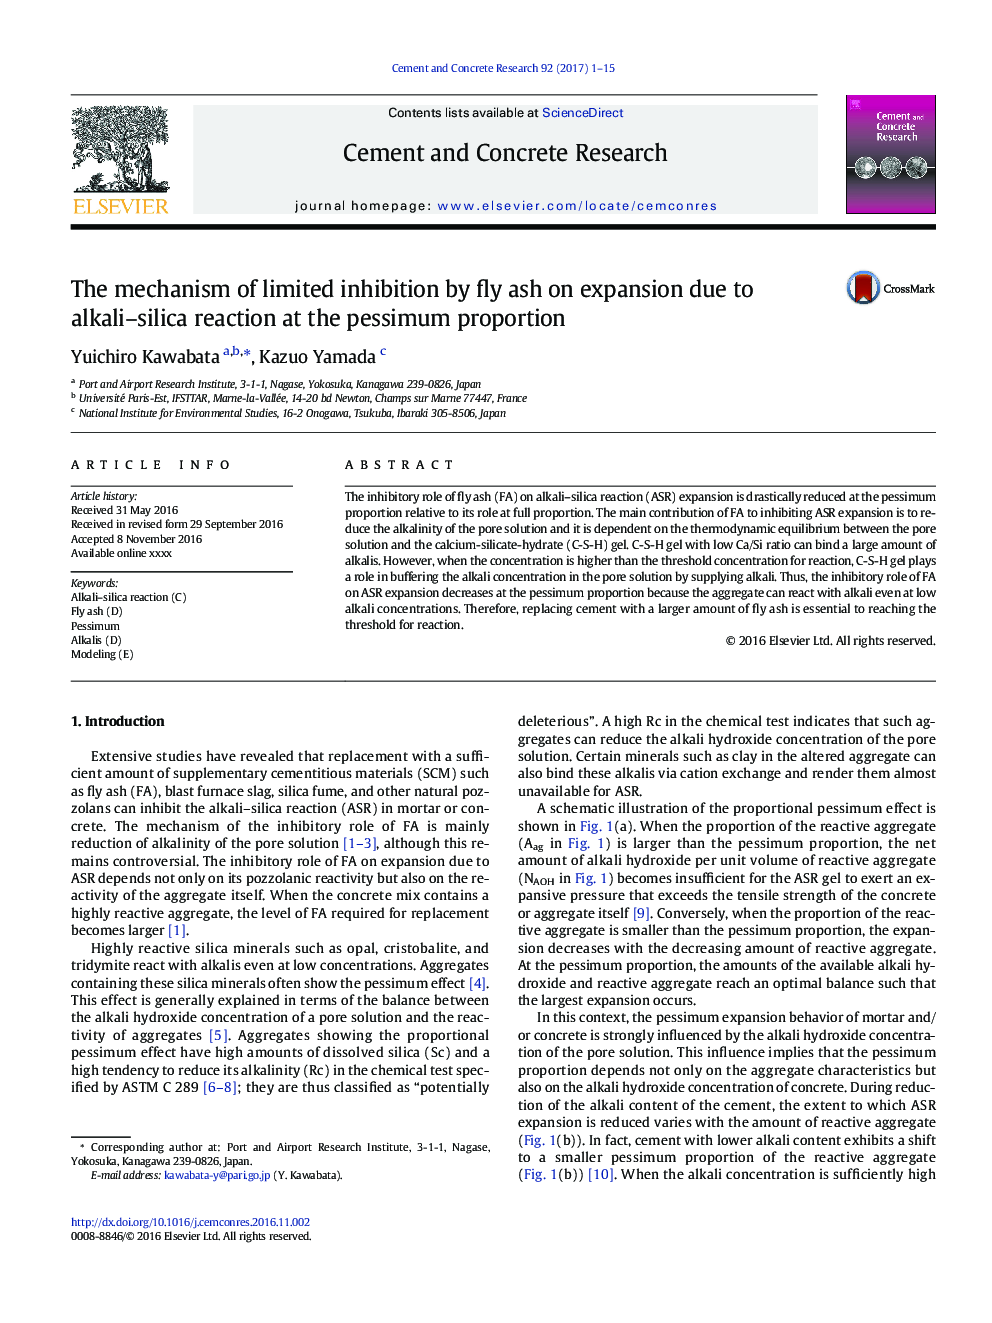 The mechanism of limited inhibition by fly ash on expansion due to alkali-silica reaction at the pessimum proportion